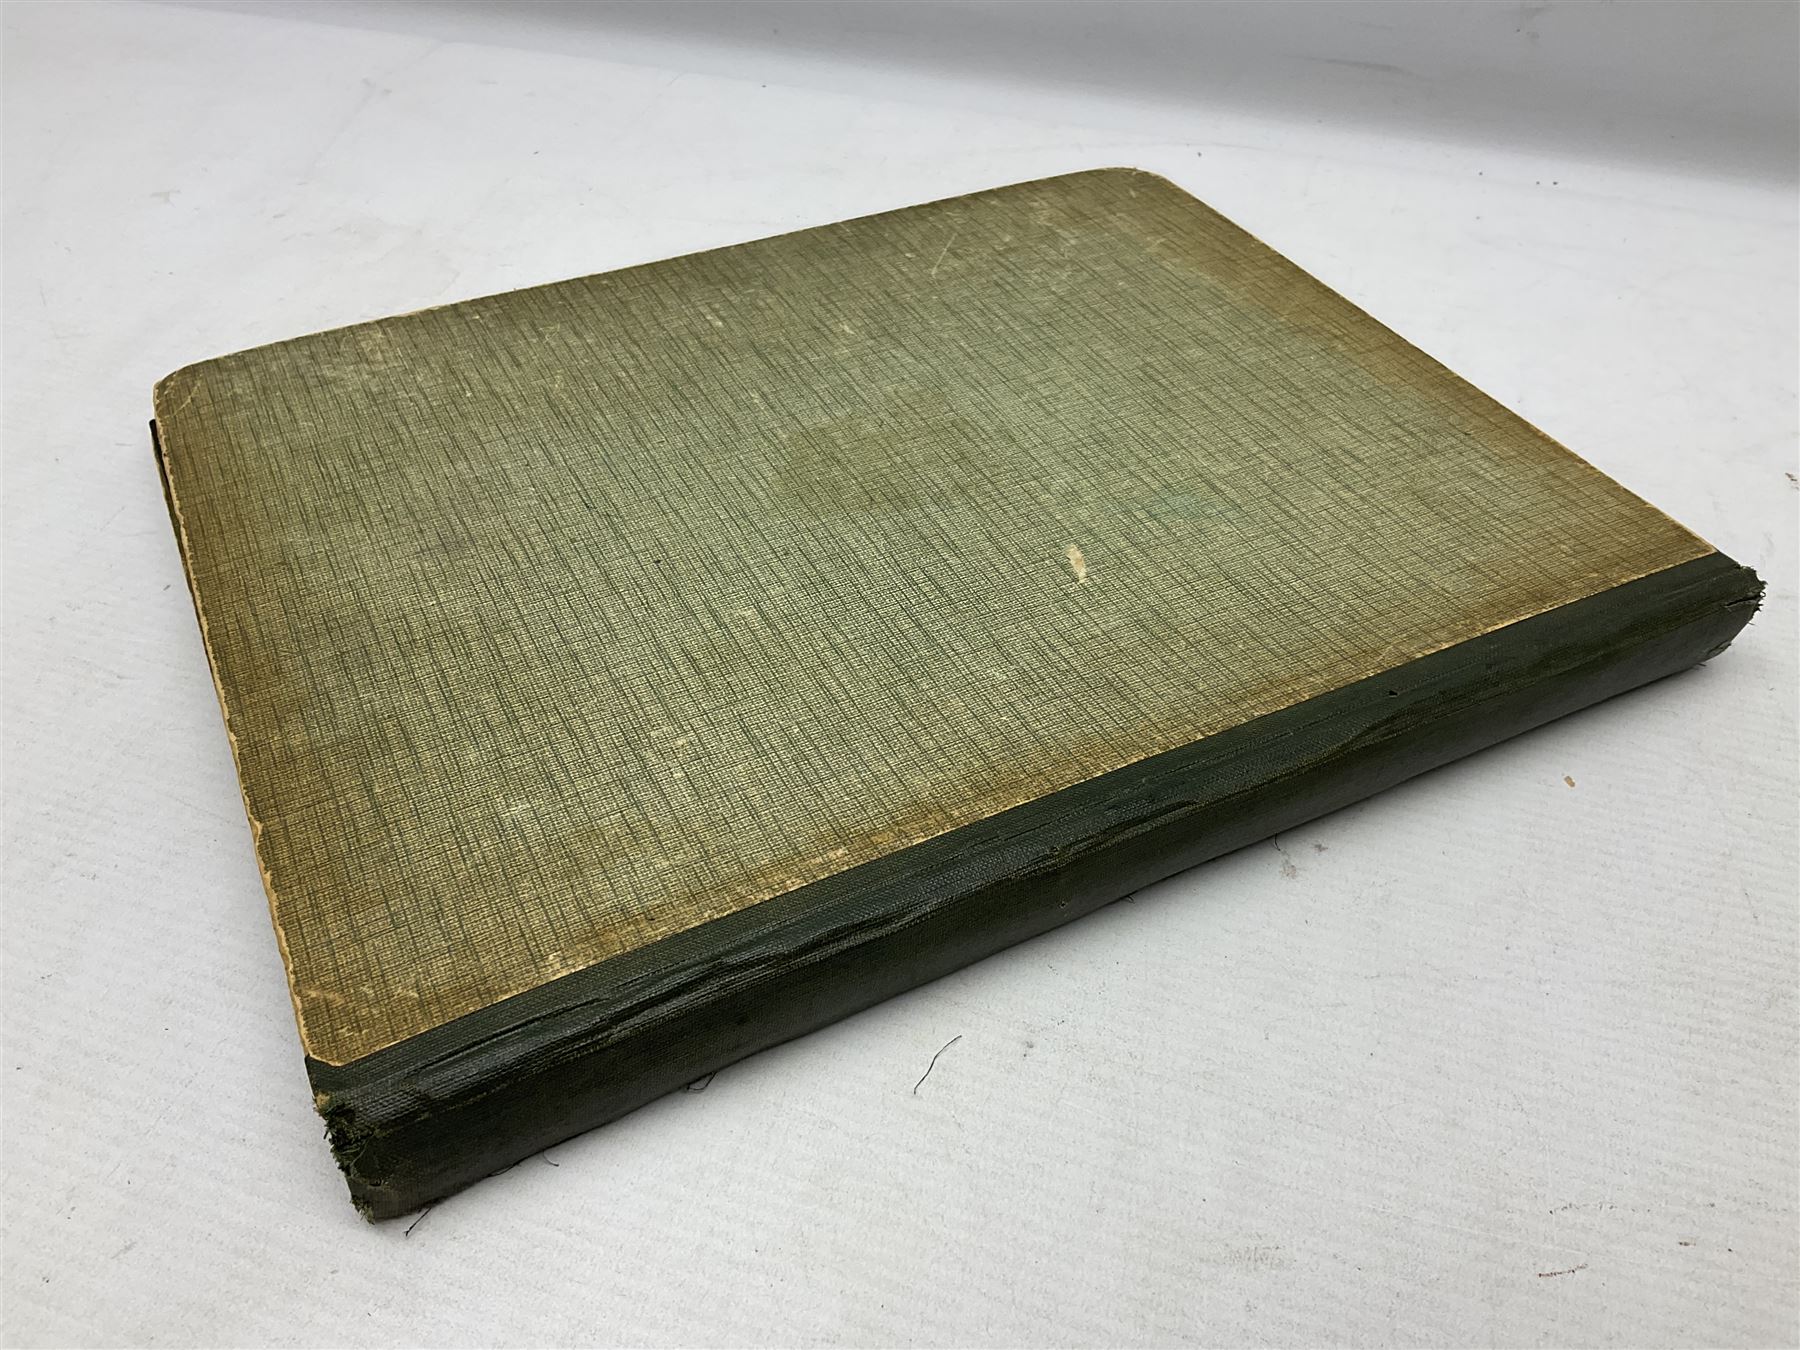 Victorian scrapbook containing twenty-six double sided pages and two fixed end pages of various fixe - Image 9 of 10